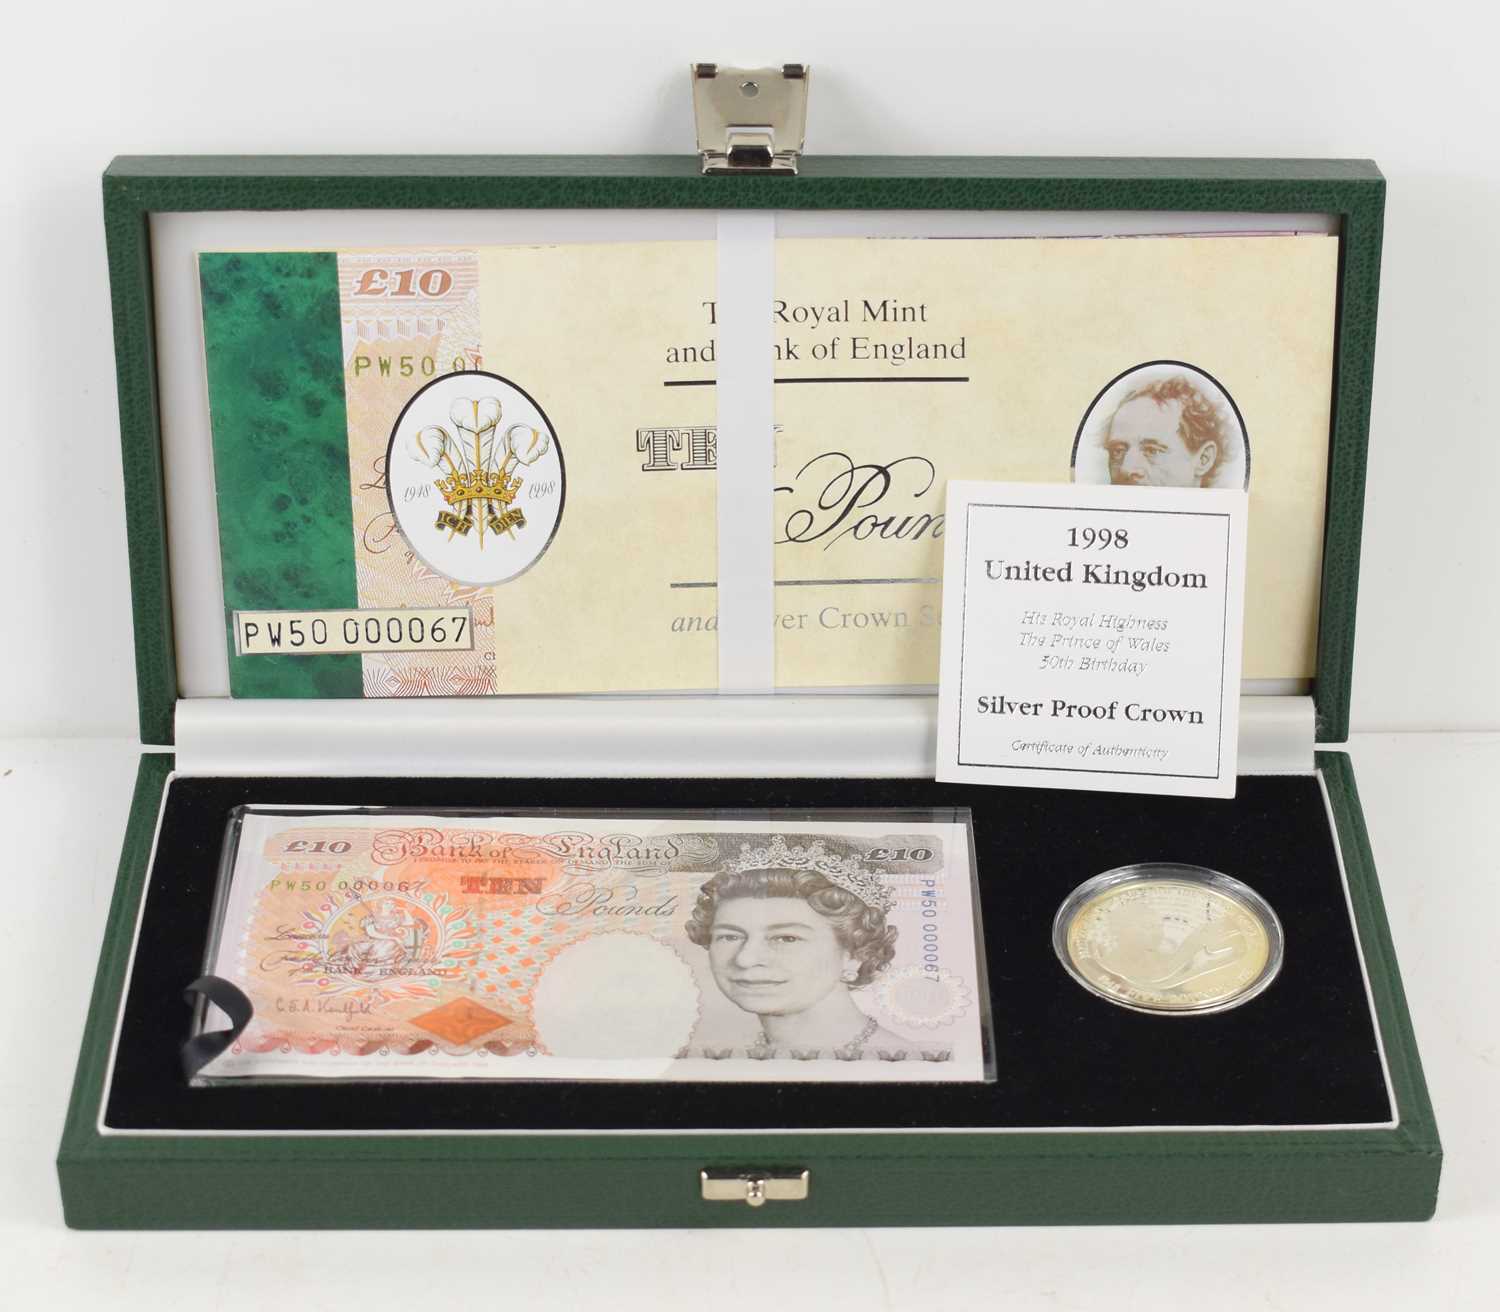 The Royal Mint and Bank of England Ten pounds and silver crown set, limited edition, with